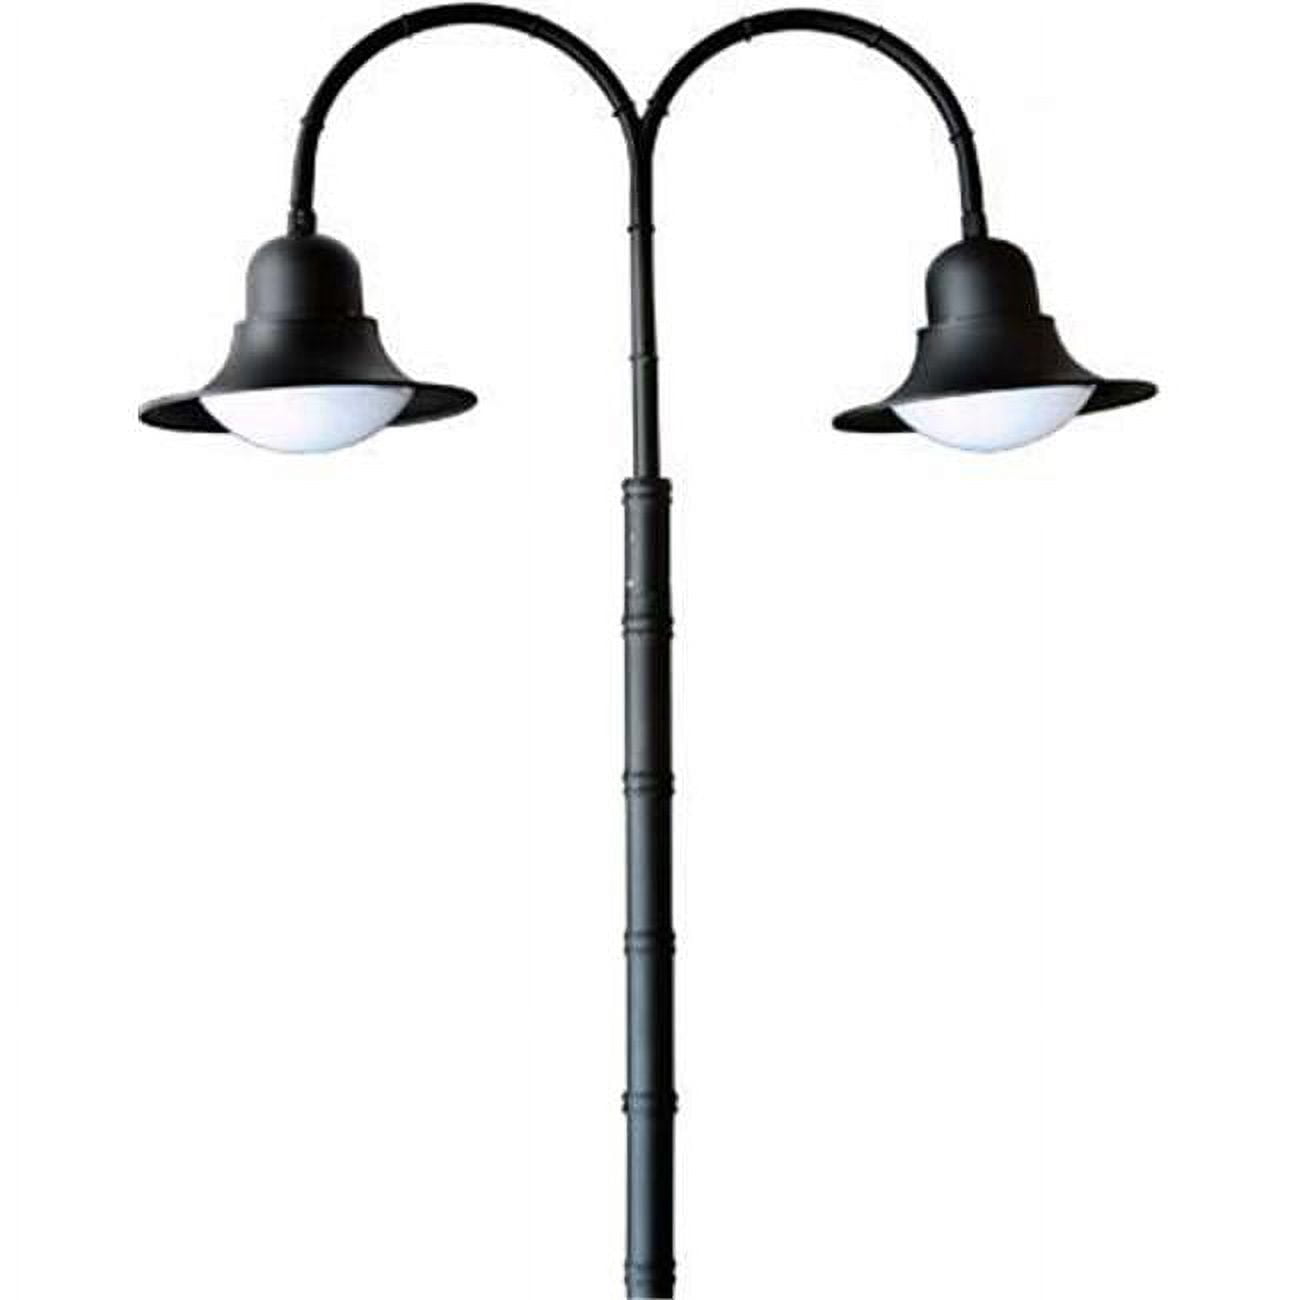 Picture of Dabmar Lighting GM626-B 50W 120V Powder Coated Cast Aluminum Post Top Light Fixture with 2x Metal Halide Lamp, Black